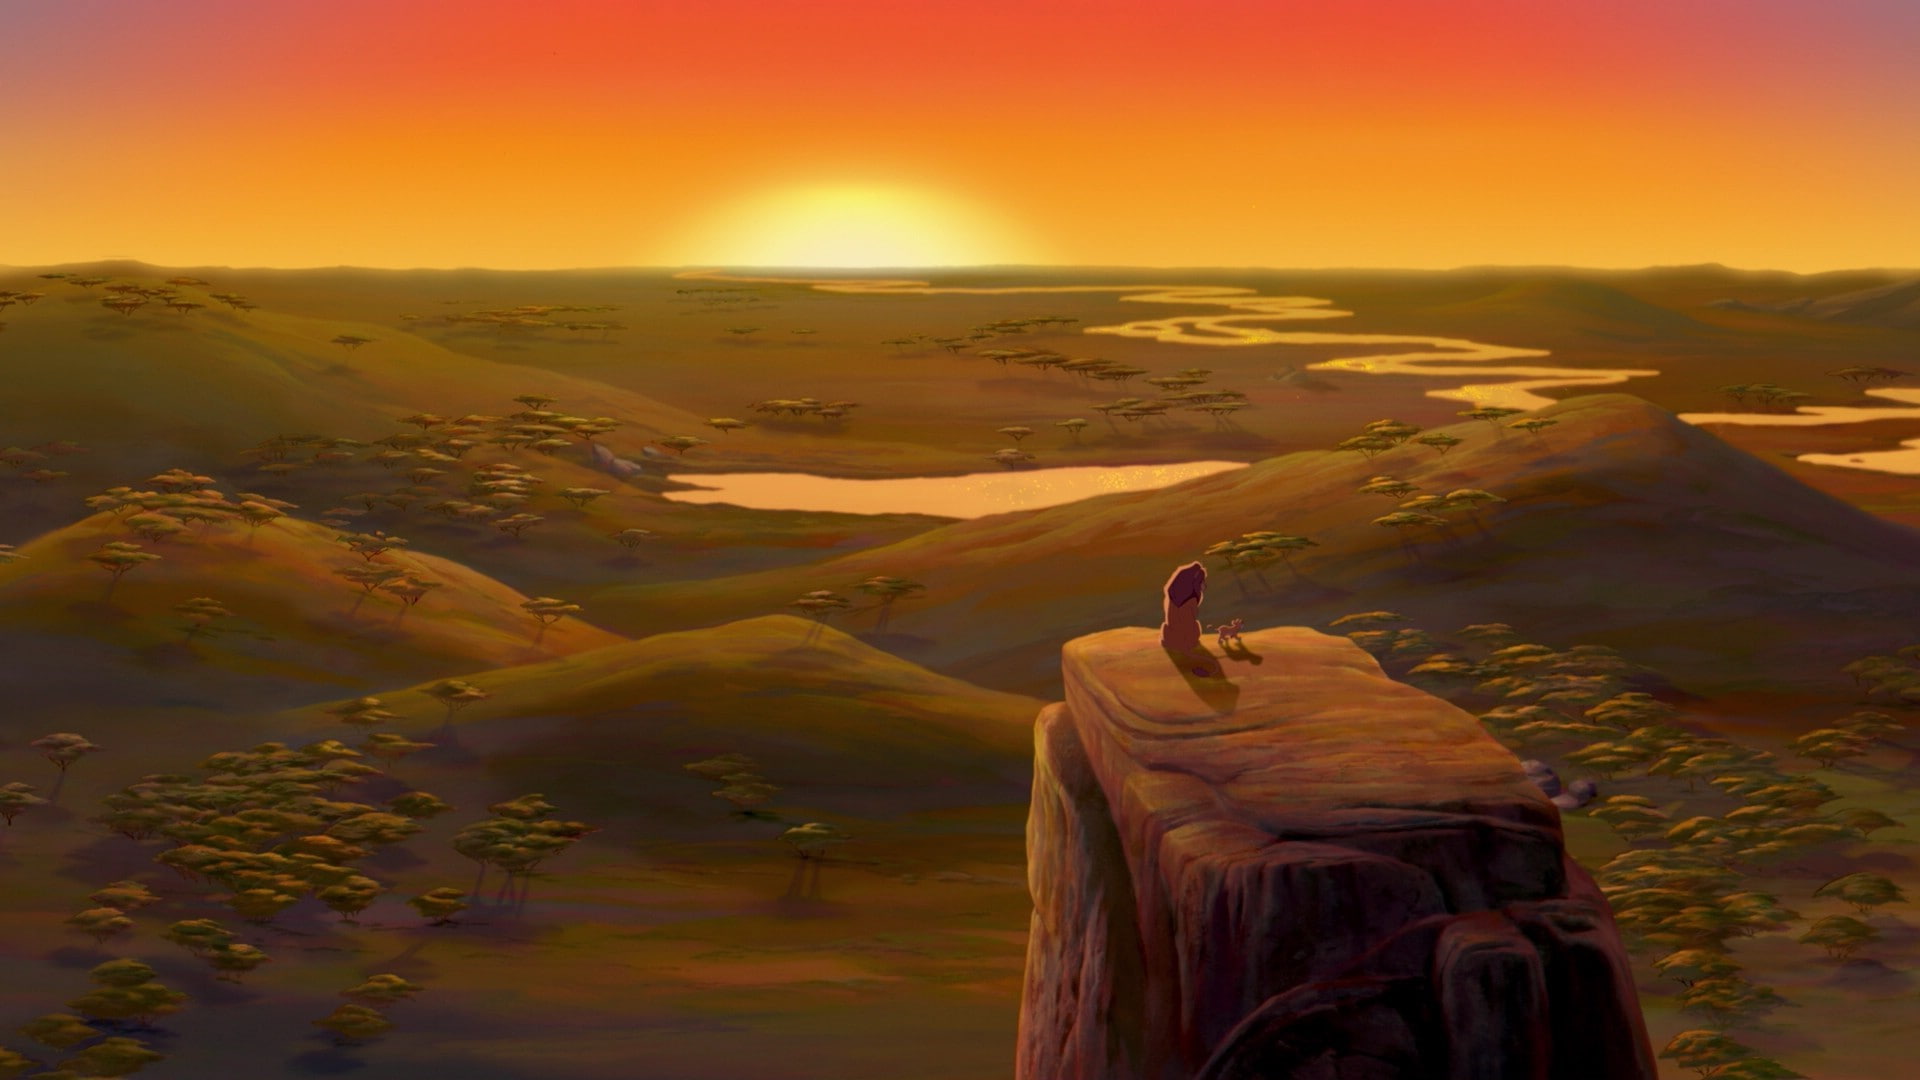 The Lion King Sunset Landscape HD, movies